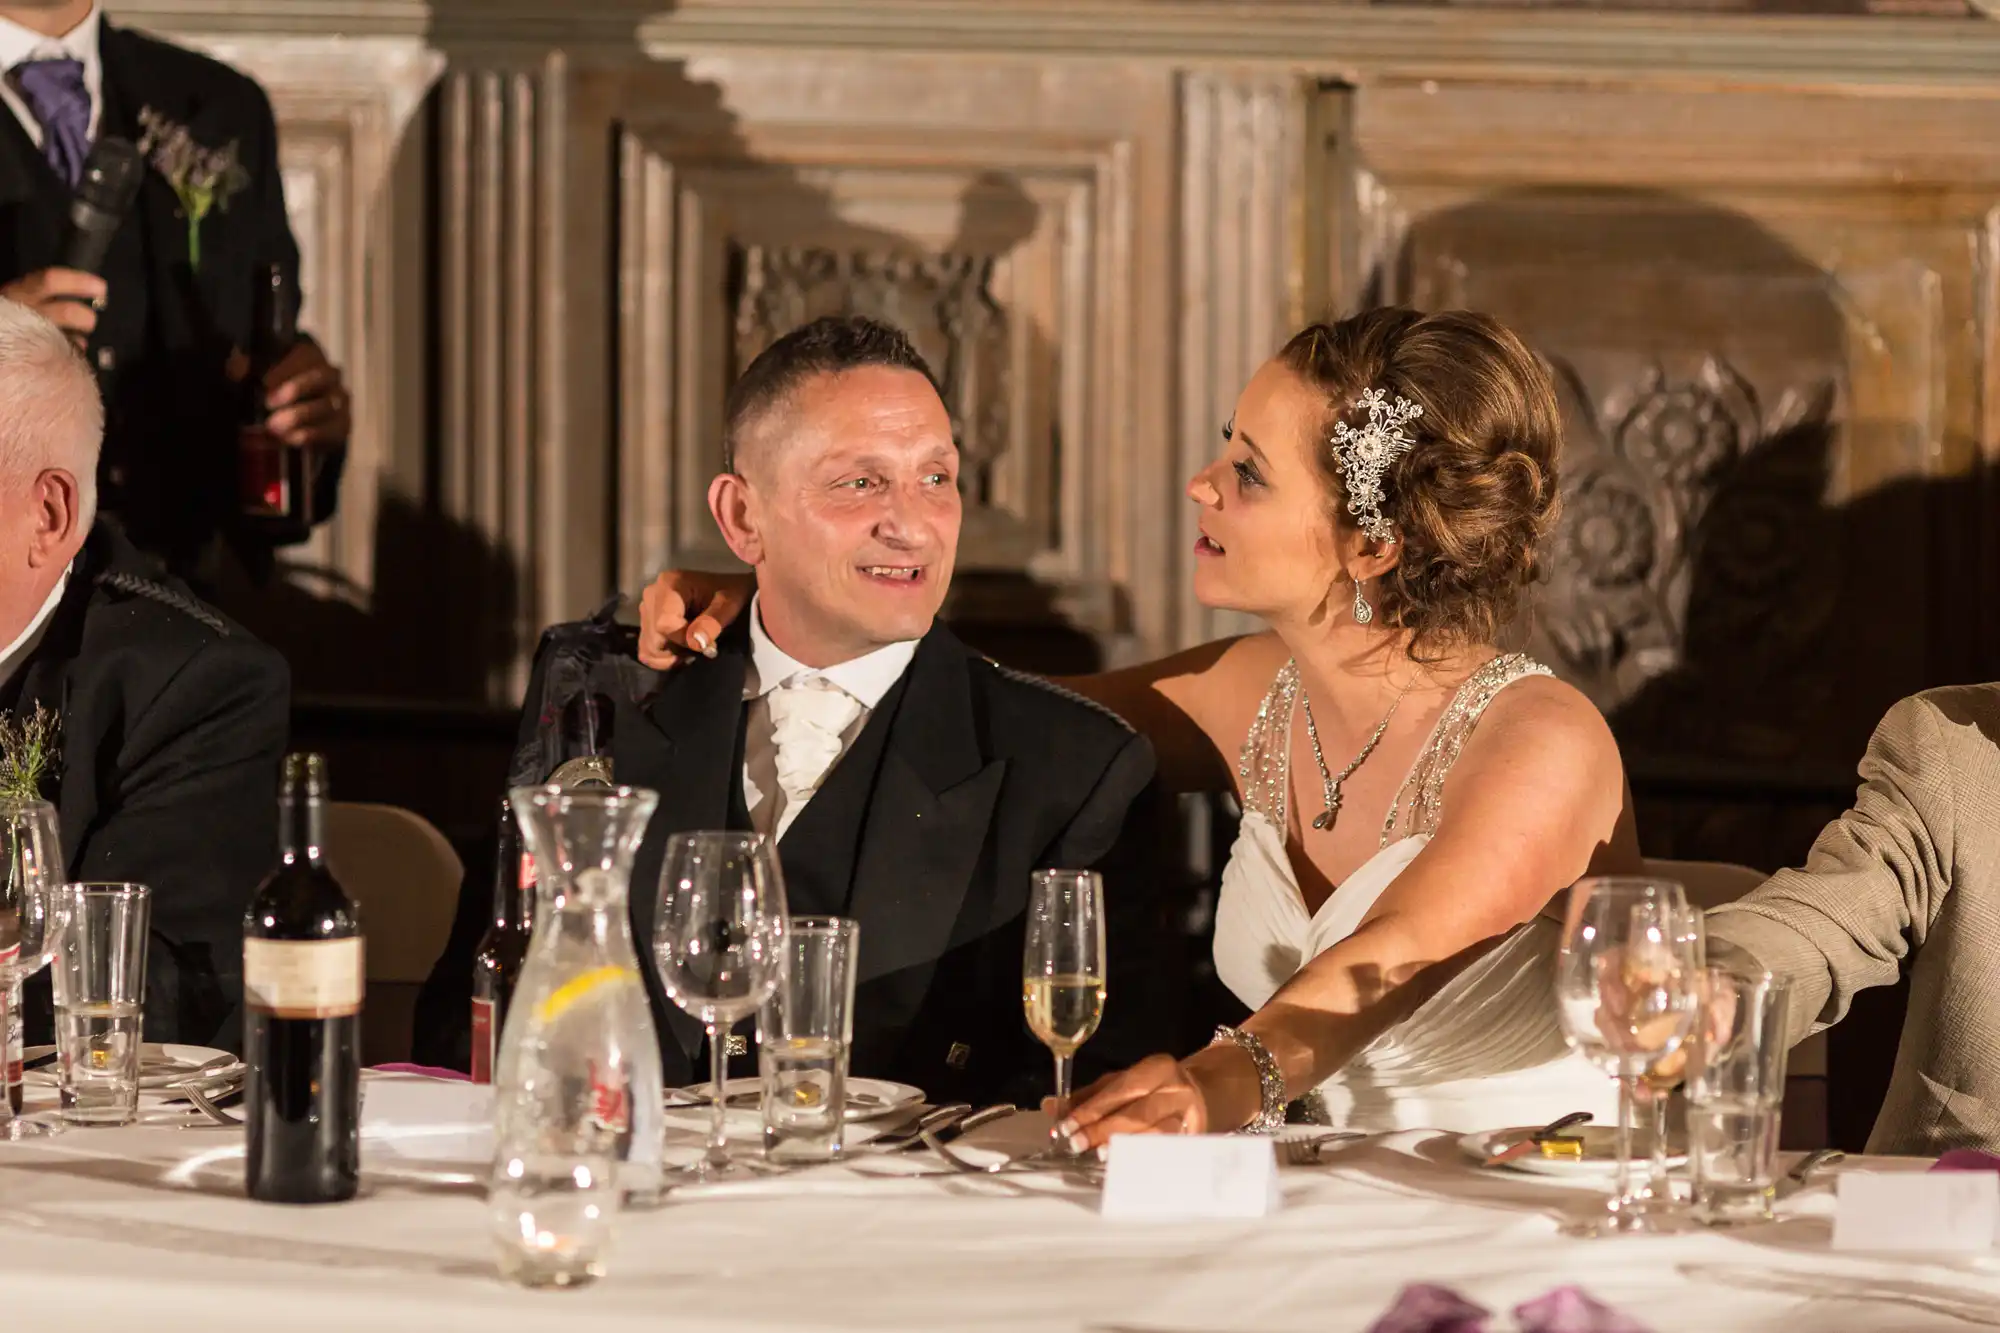 A bride and groom at a wedding reception table, dressed elegantly, looking towards someone off-camera while surrounded by guests and wine bottles.